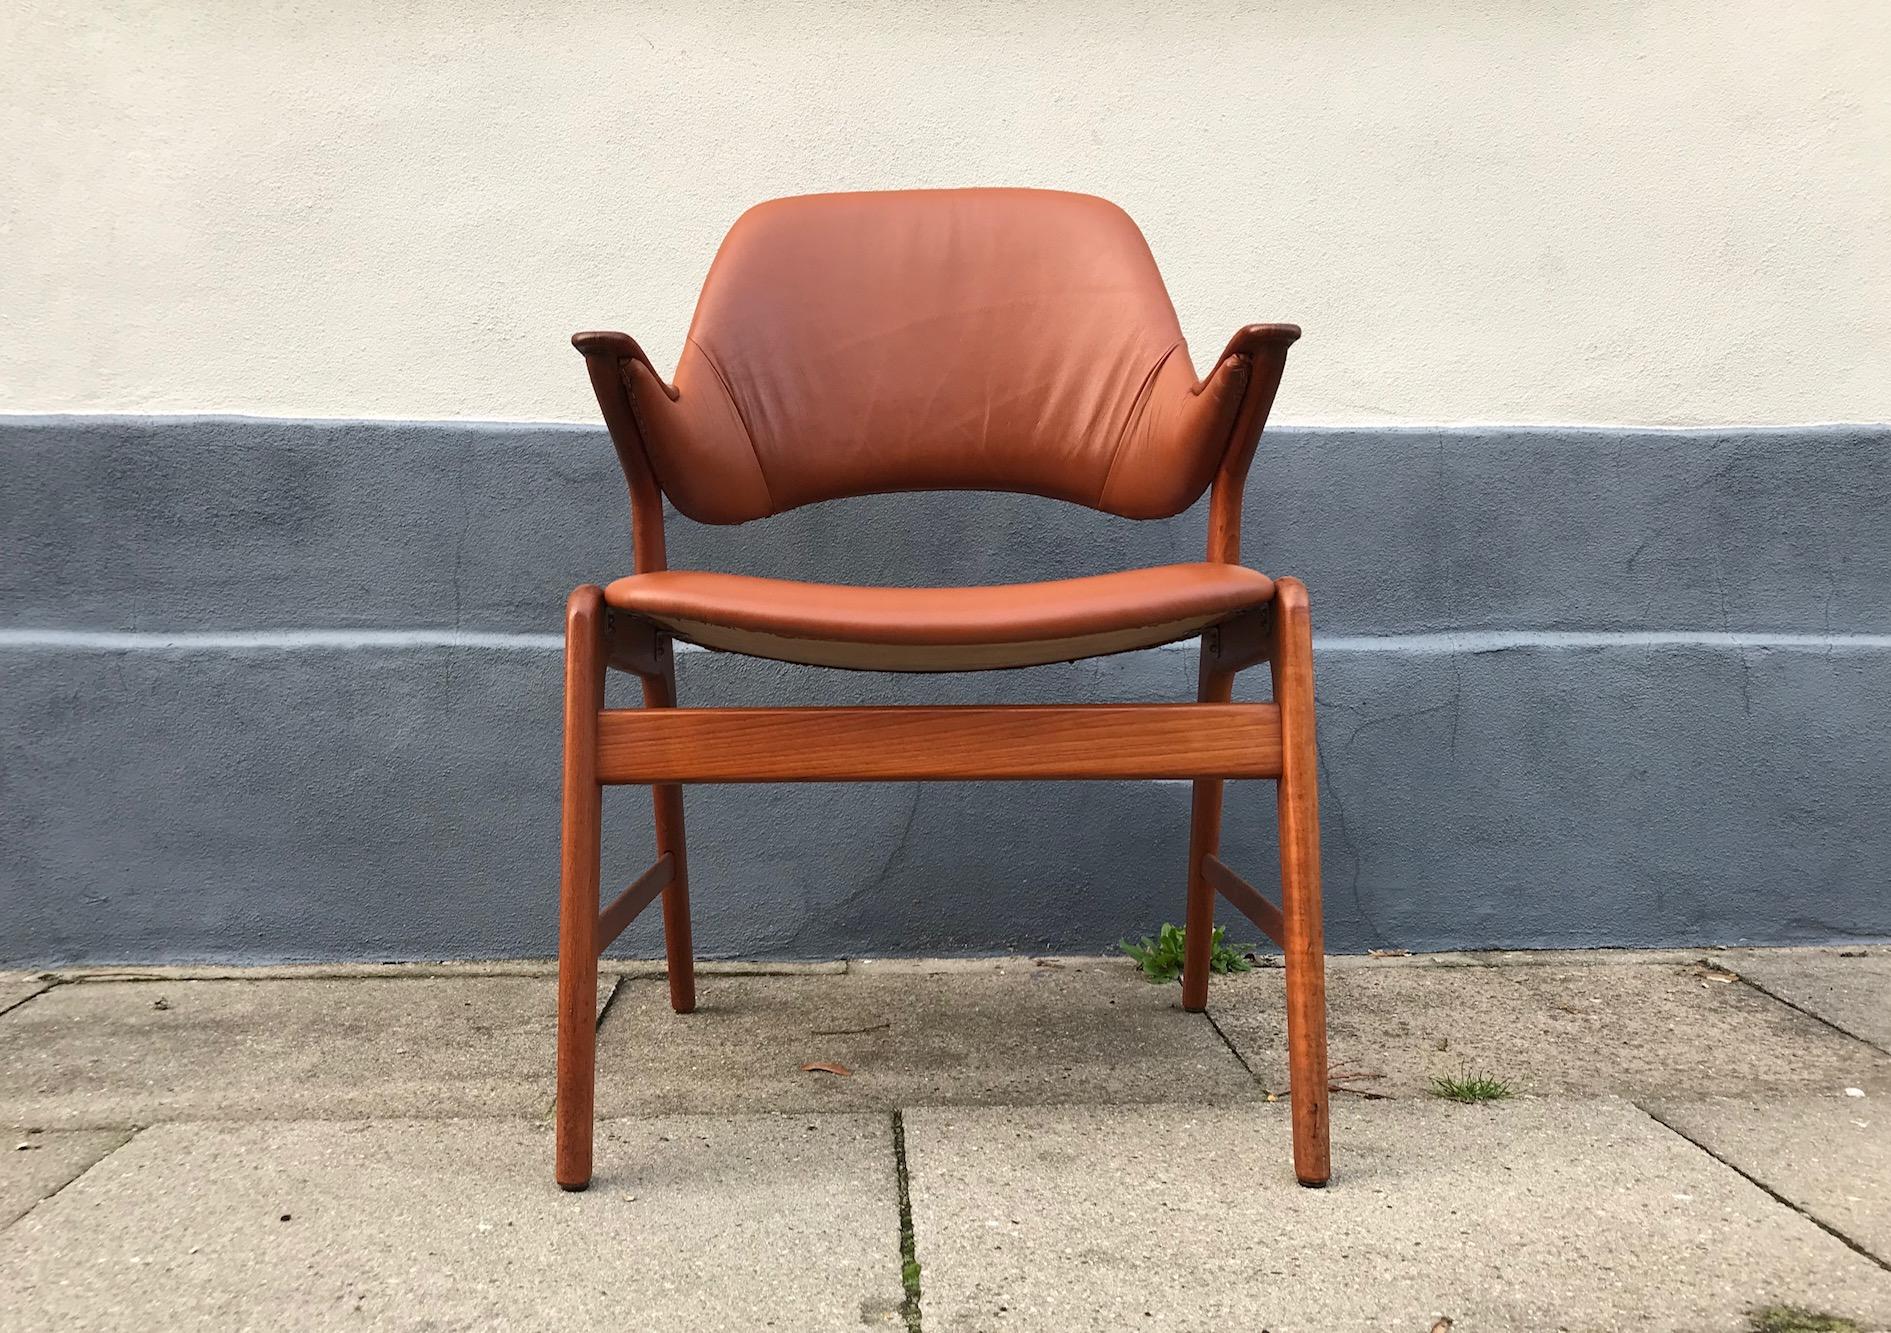 Solid teak armchair or lounge chair recently upholstered in tanned brown aniline leather. The 'nails' armrests are made from hand sanded/finished oak. It was manufactured by N. A. Jørgensen (later Bramin) in Denmark in the early 1960s. It may have